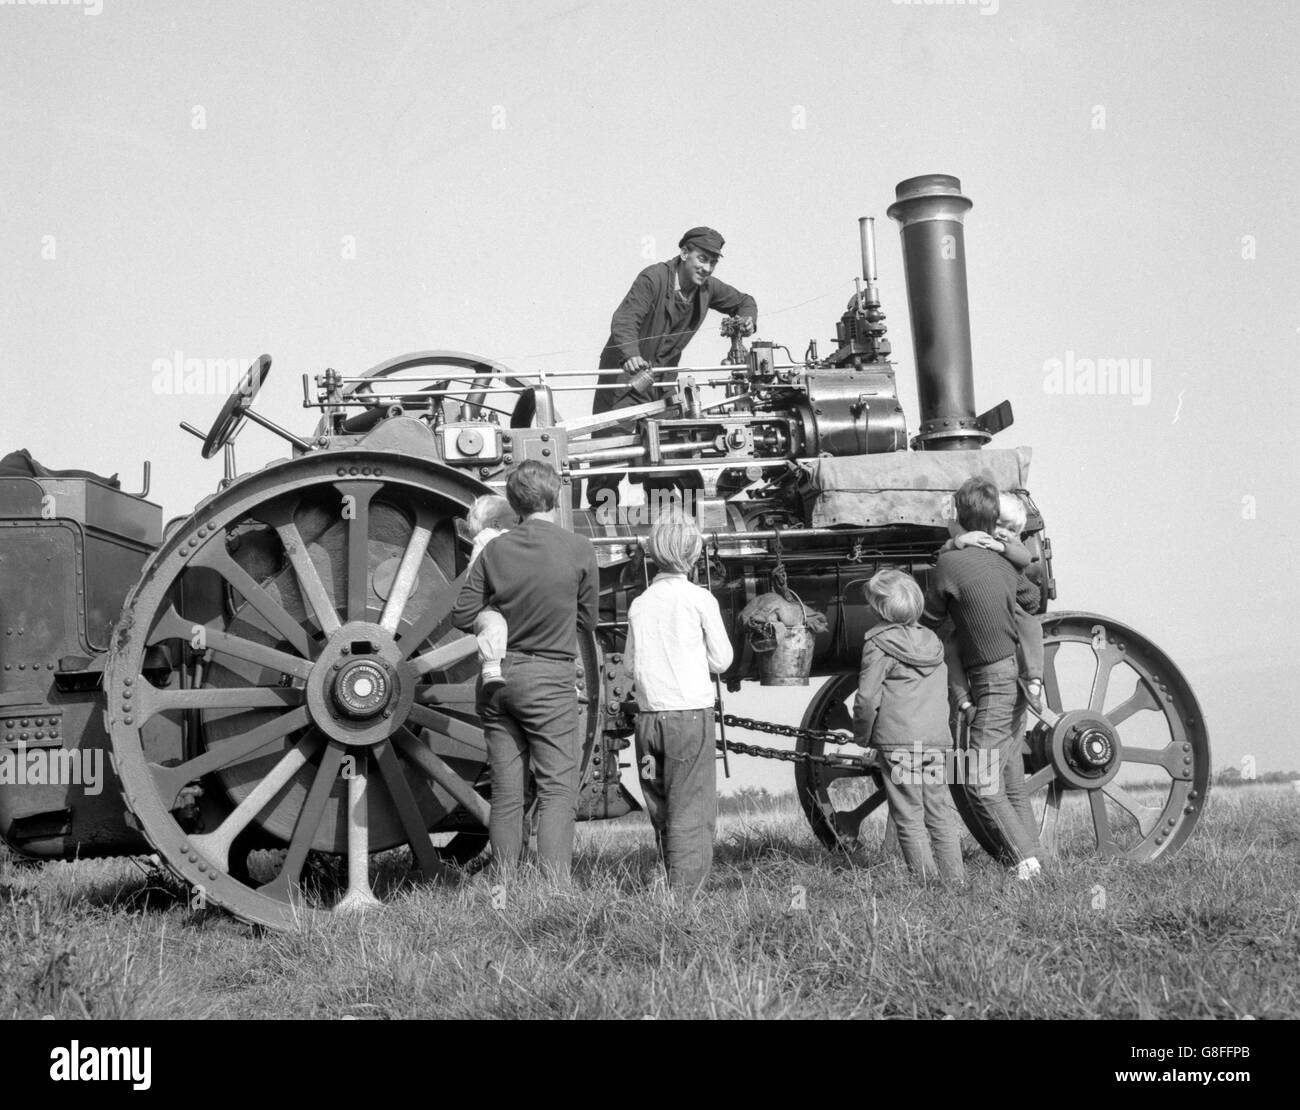 John Fieldgate and his oilcan fascinate a youthful audience at Marks Tey, Essex, where Mr Fieldgate is seen preparing a 1926 Marshall 6 hp traction engine for a forthcoming show. The old steam engine is kept in perfect working order. Stock Photo